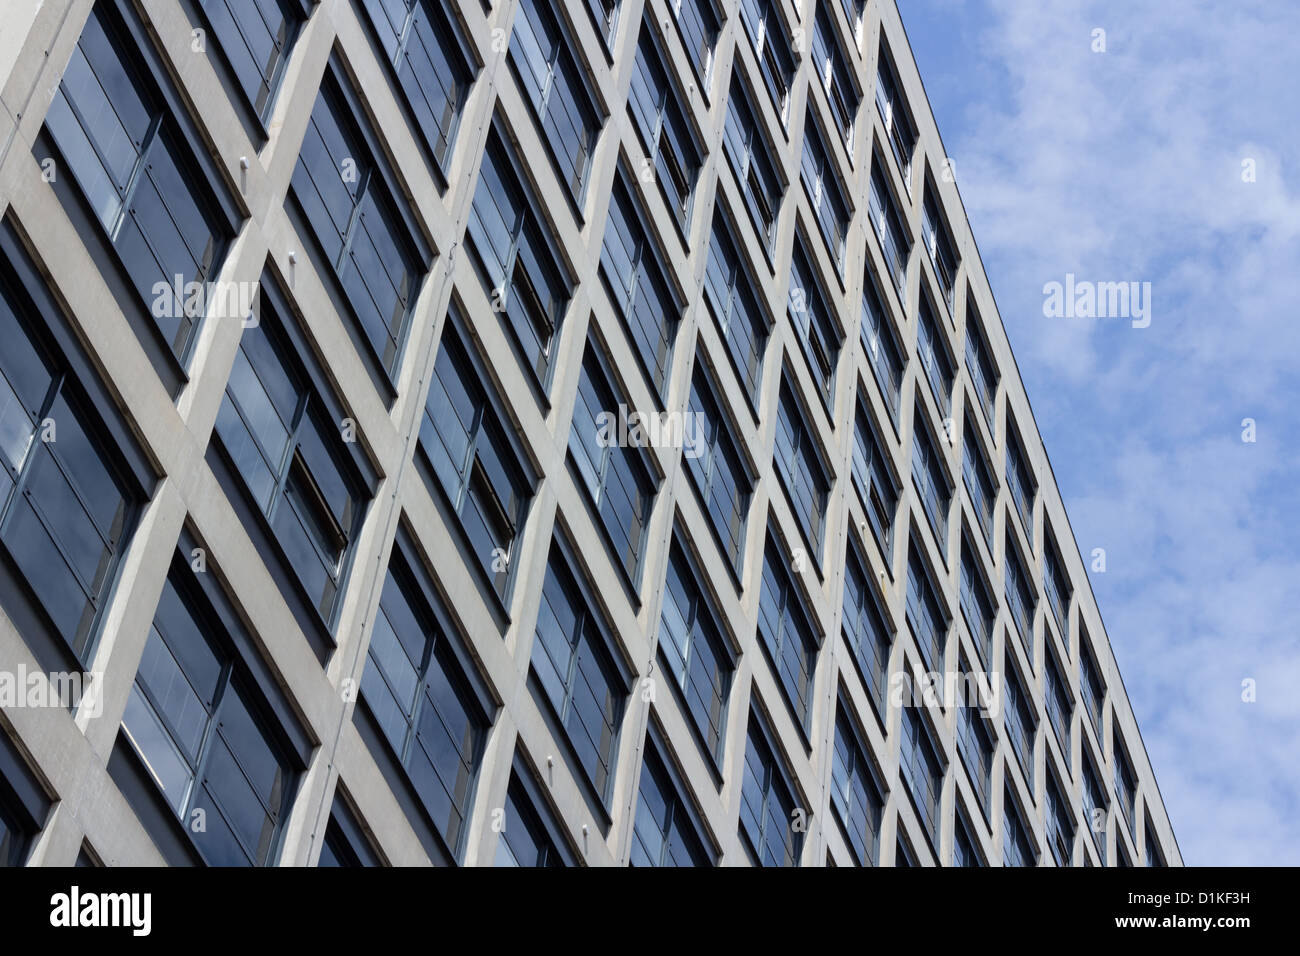 Pattern of windows in a concrete building against the sky Stock Photo